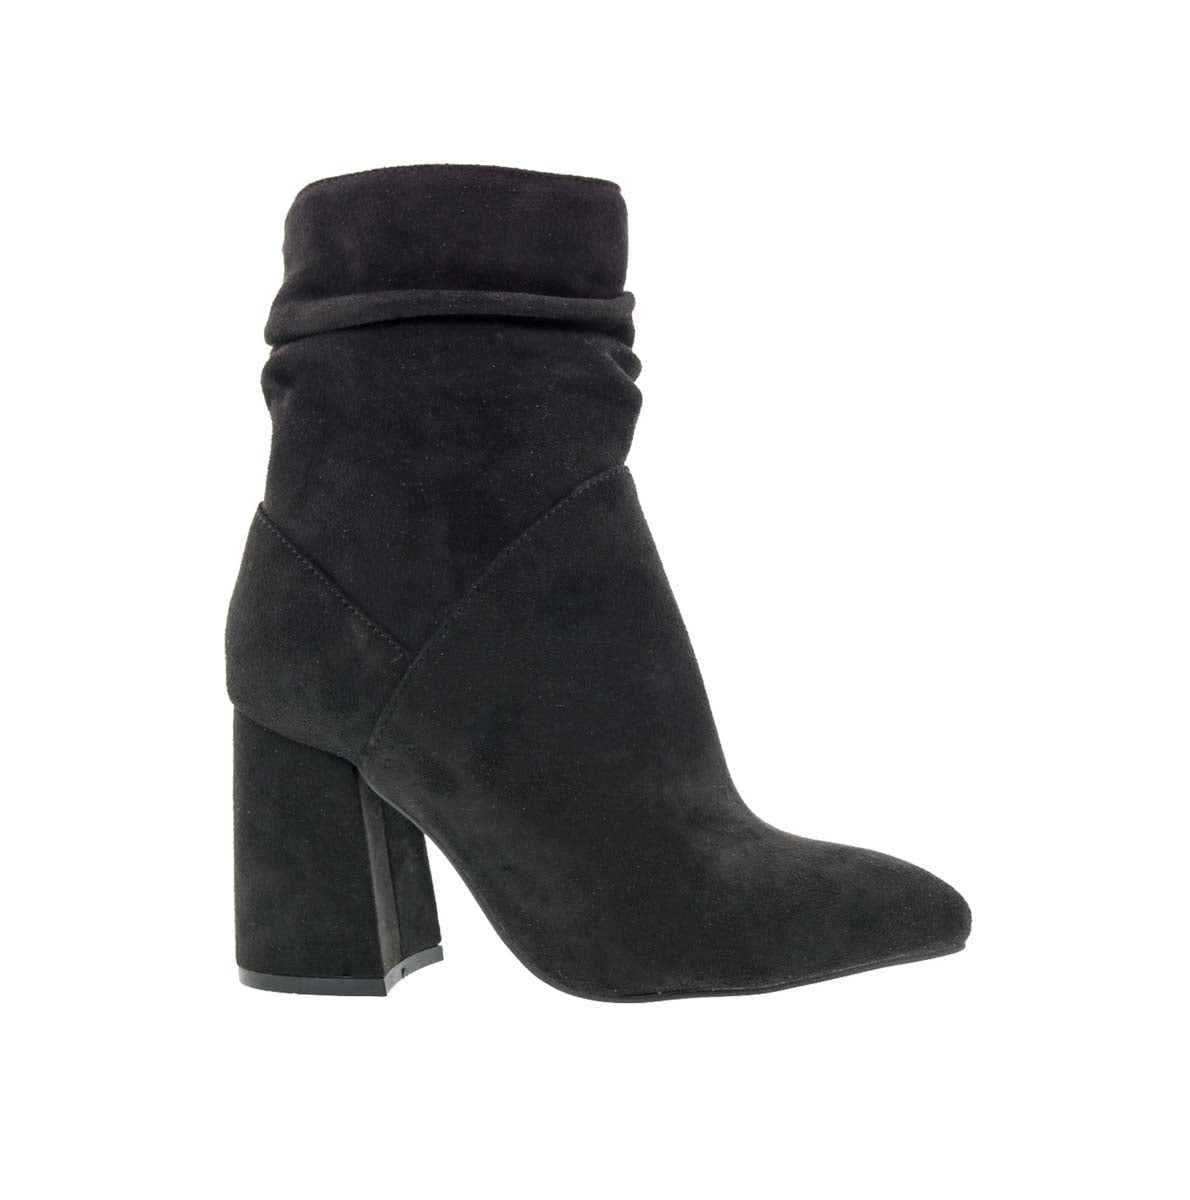 BELLINI CARSON WOMEN BOOTS IN BLACK MICROSUEDE - TLW Shoes